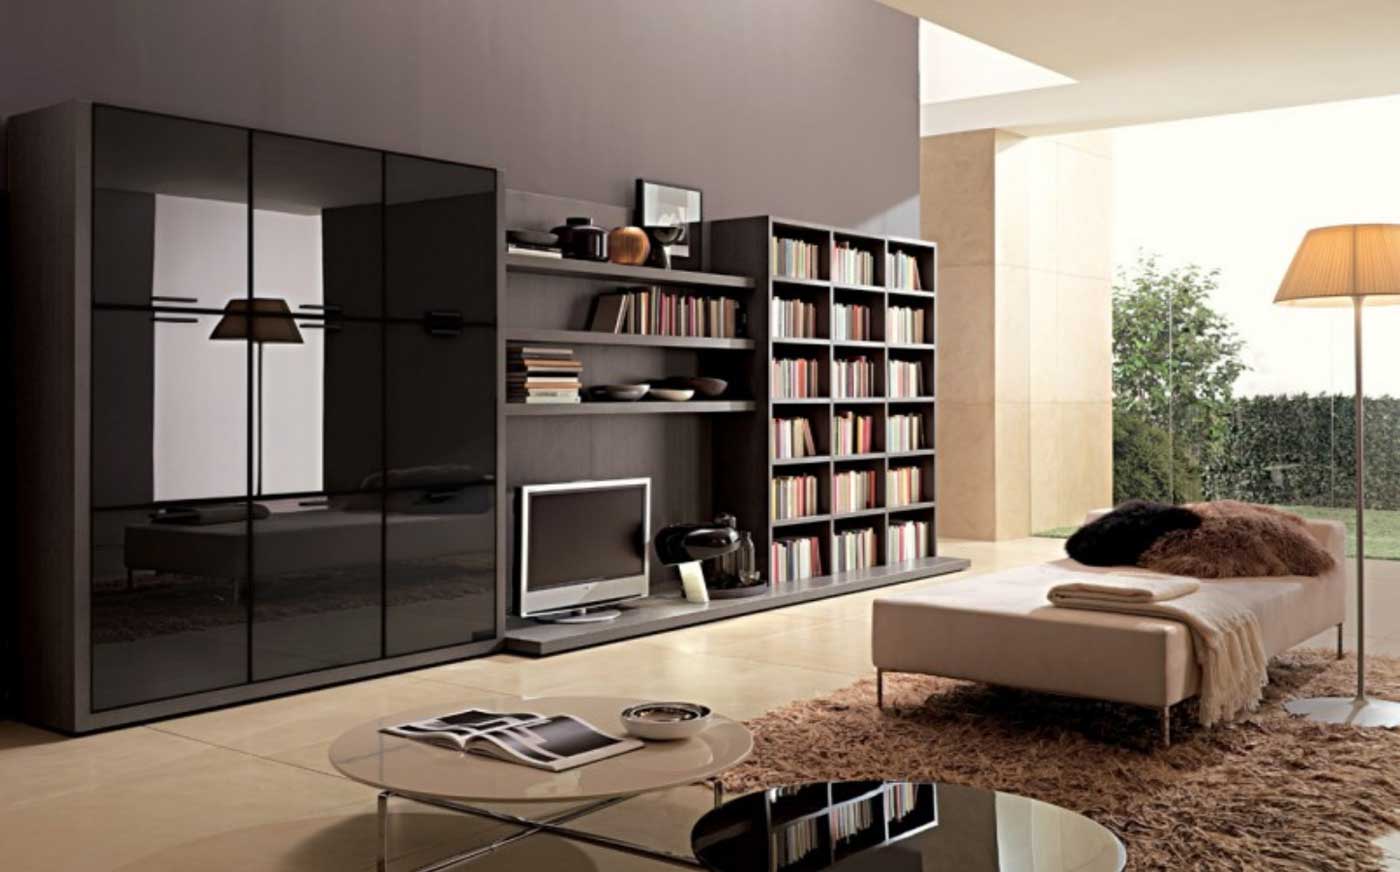 Living Room House Ravishing Living Room Sets For House Villa Design Ideas With Classic Wall Cabinets Design And Rustic Black Bookshelf Ideas Also Modern Tall Floor Lamp Design Plus White Rounded Coffee Table Design Living Room Beautiful Living Room Sets As Suitable Furniture